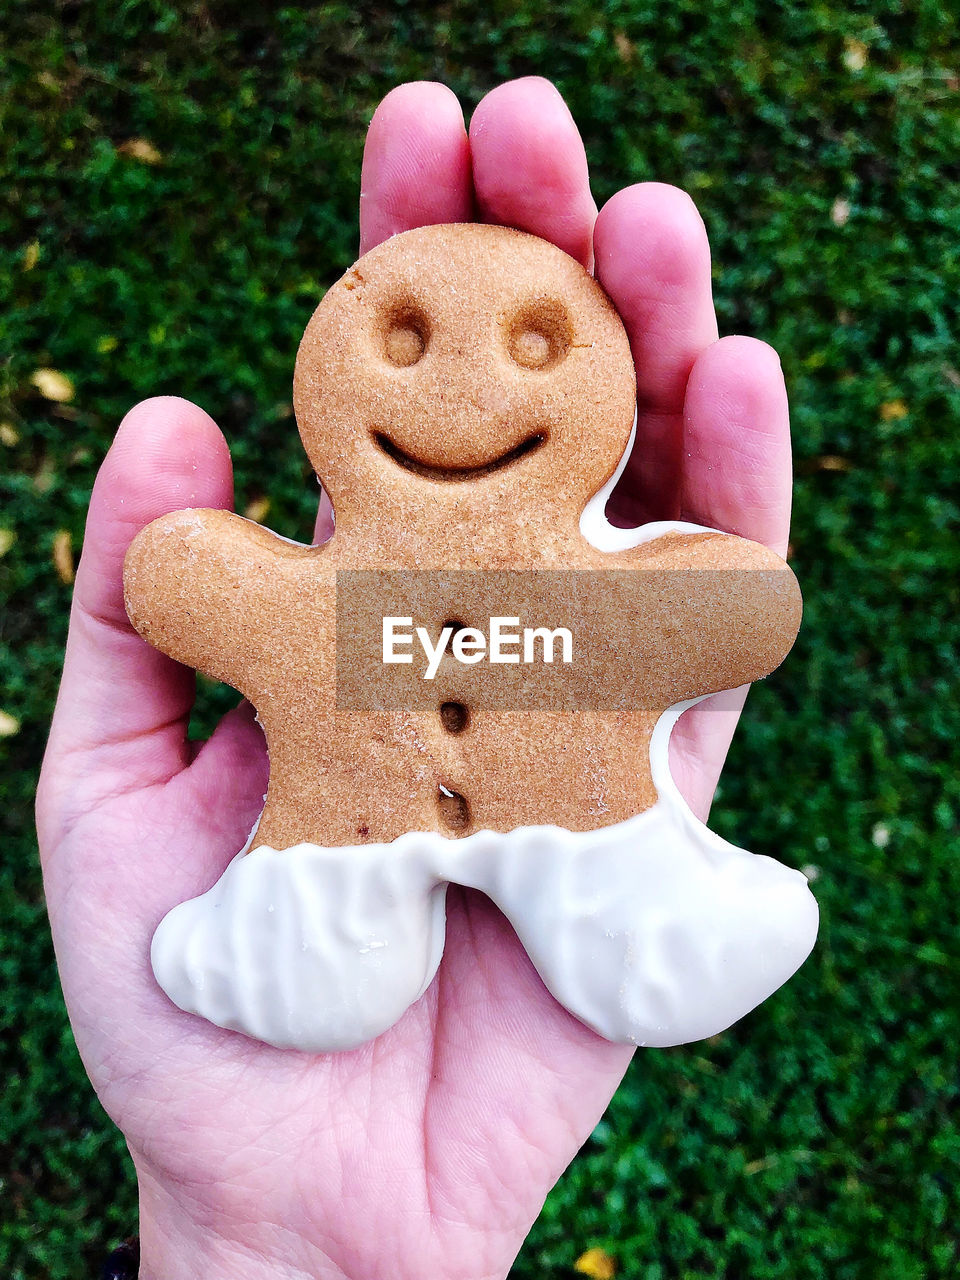 Close-up of hand holding gingerbread cookie outdoors